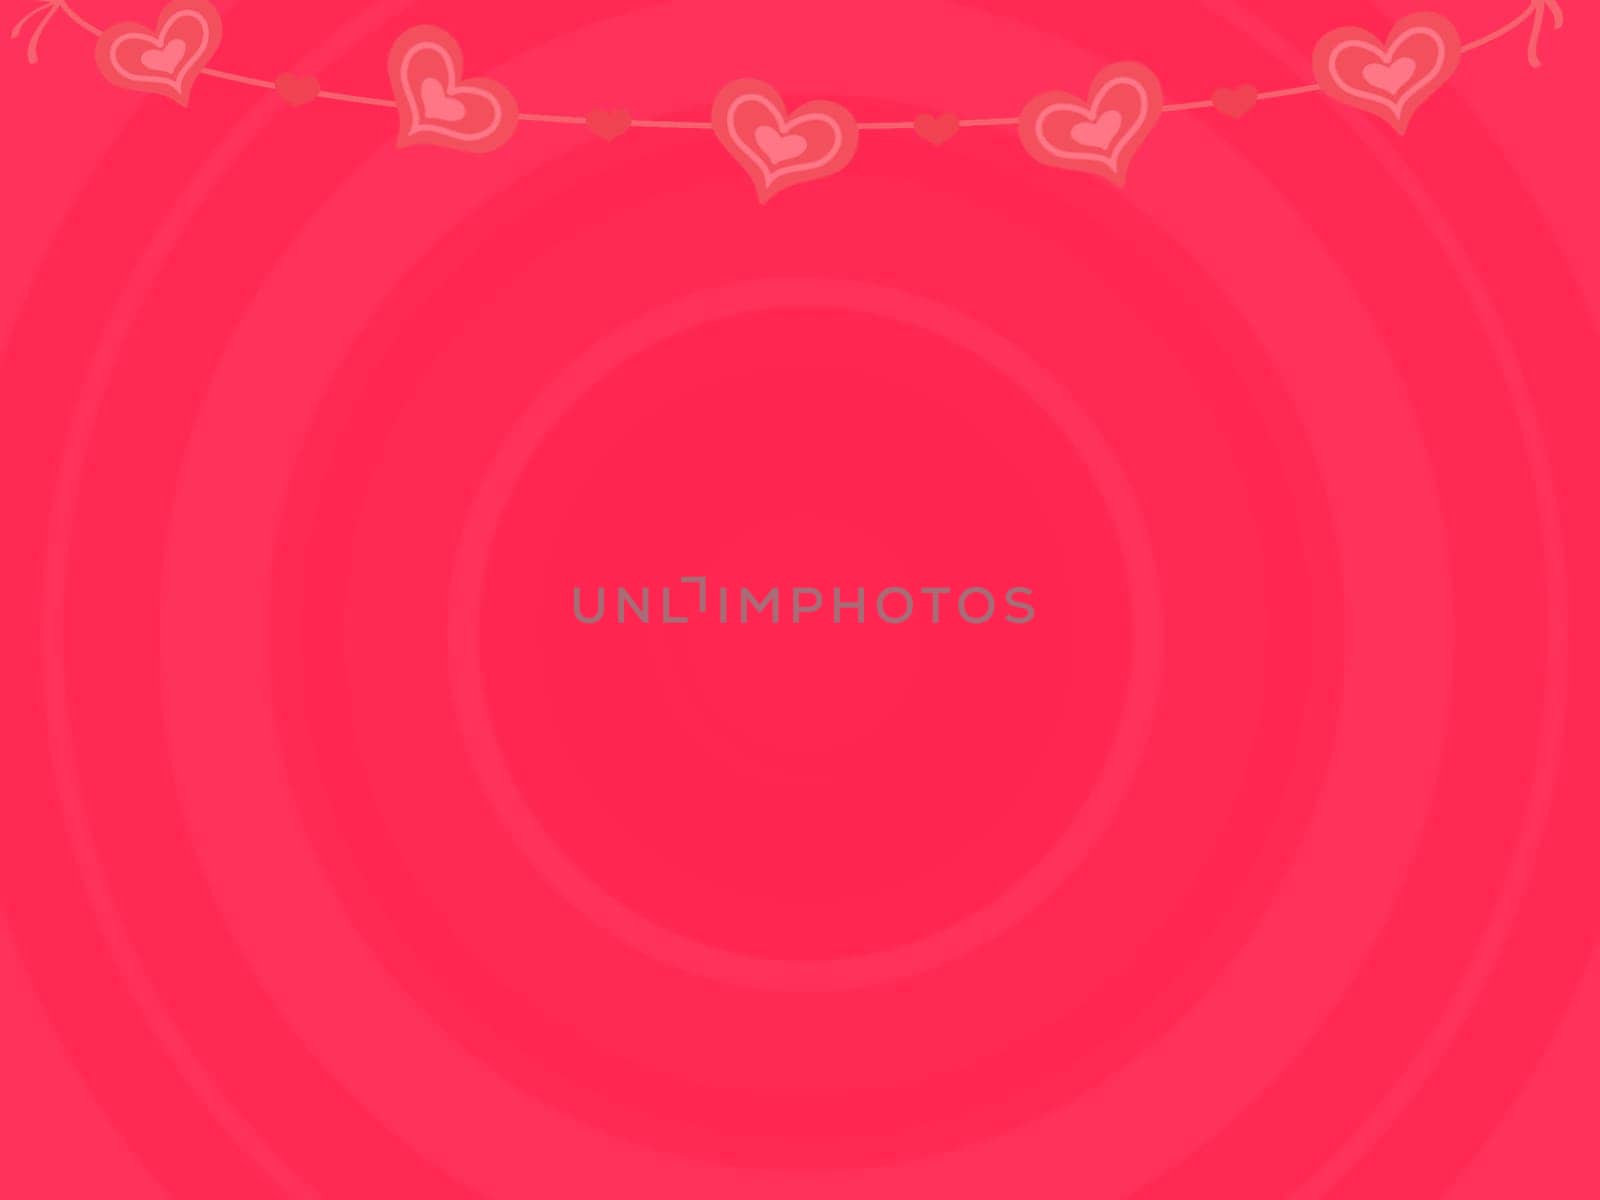 Bright Pink background with string of hearts across the top . High quality illustration